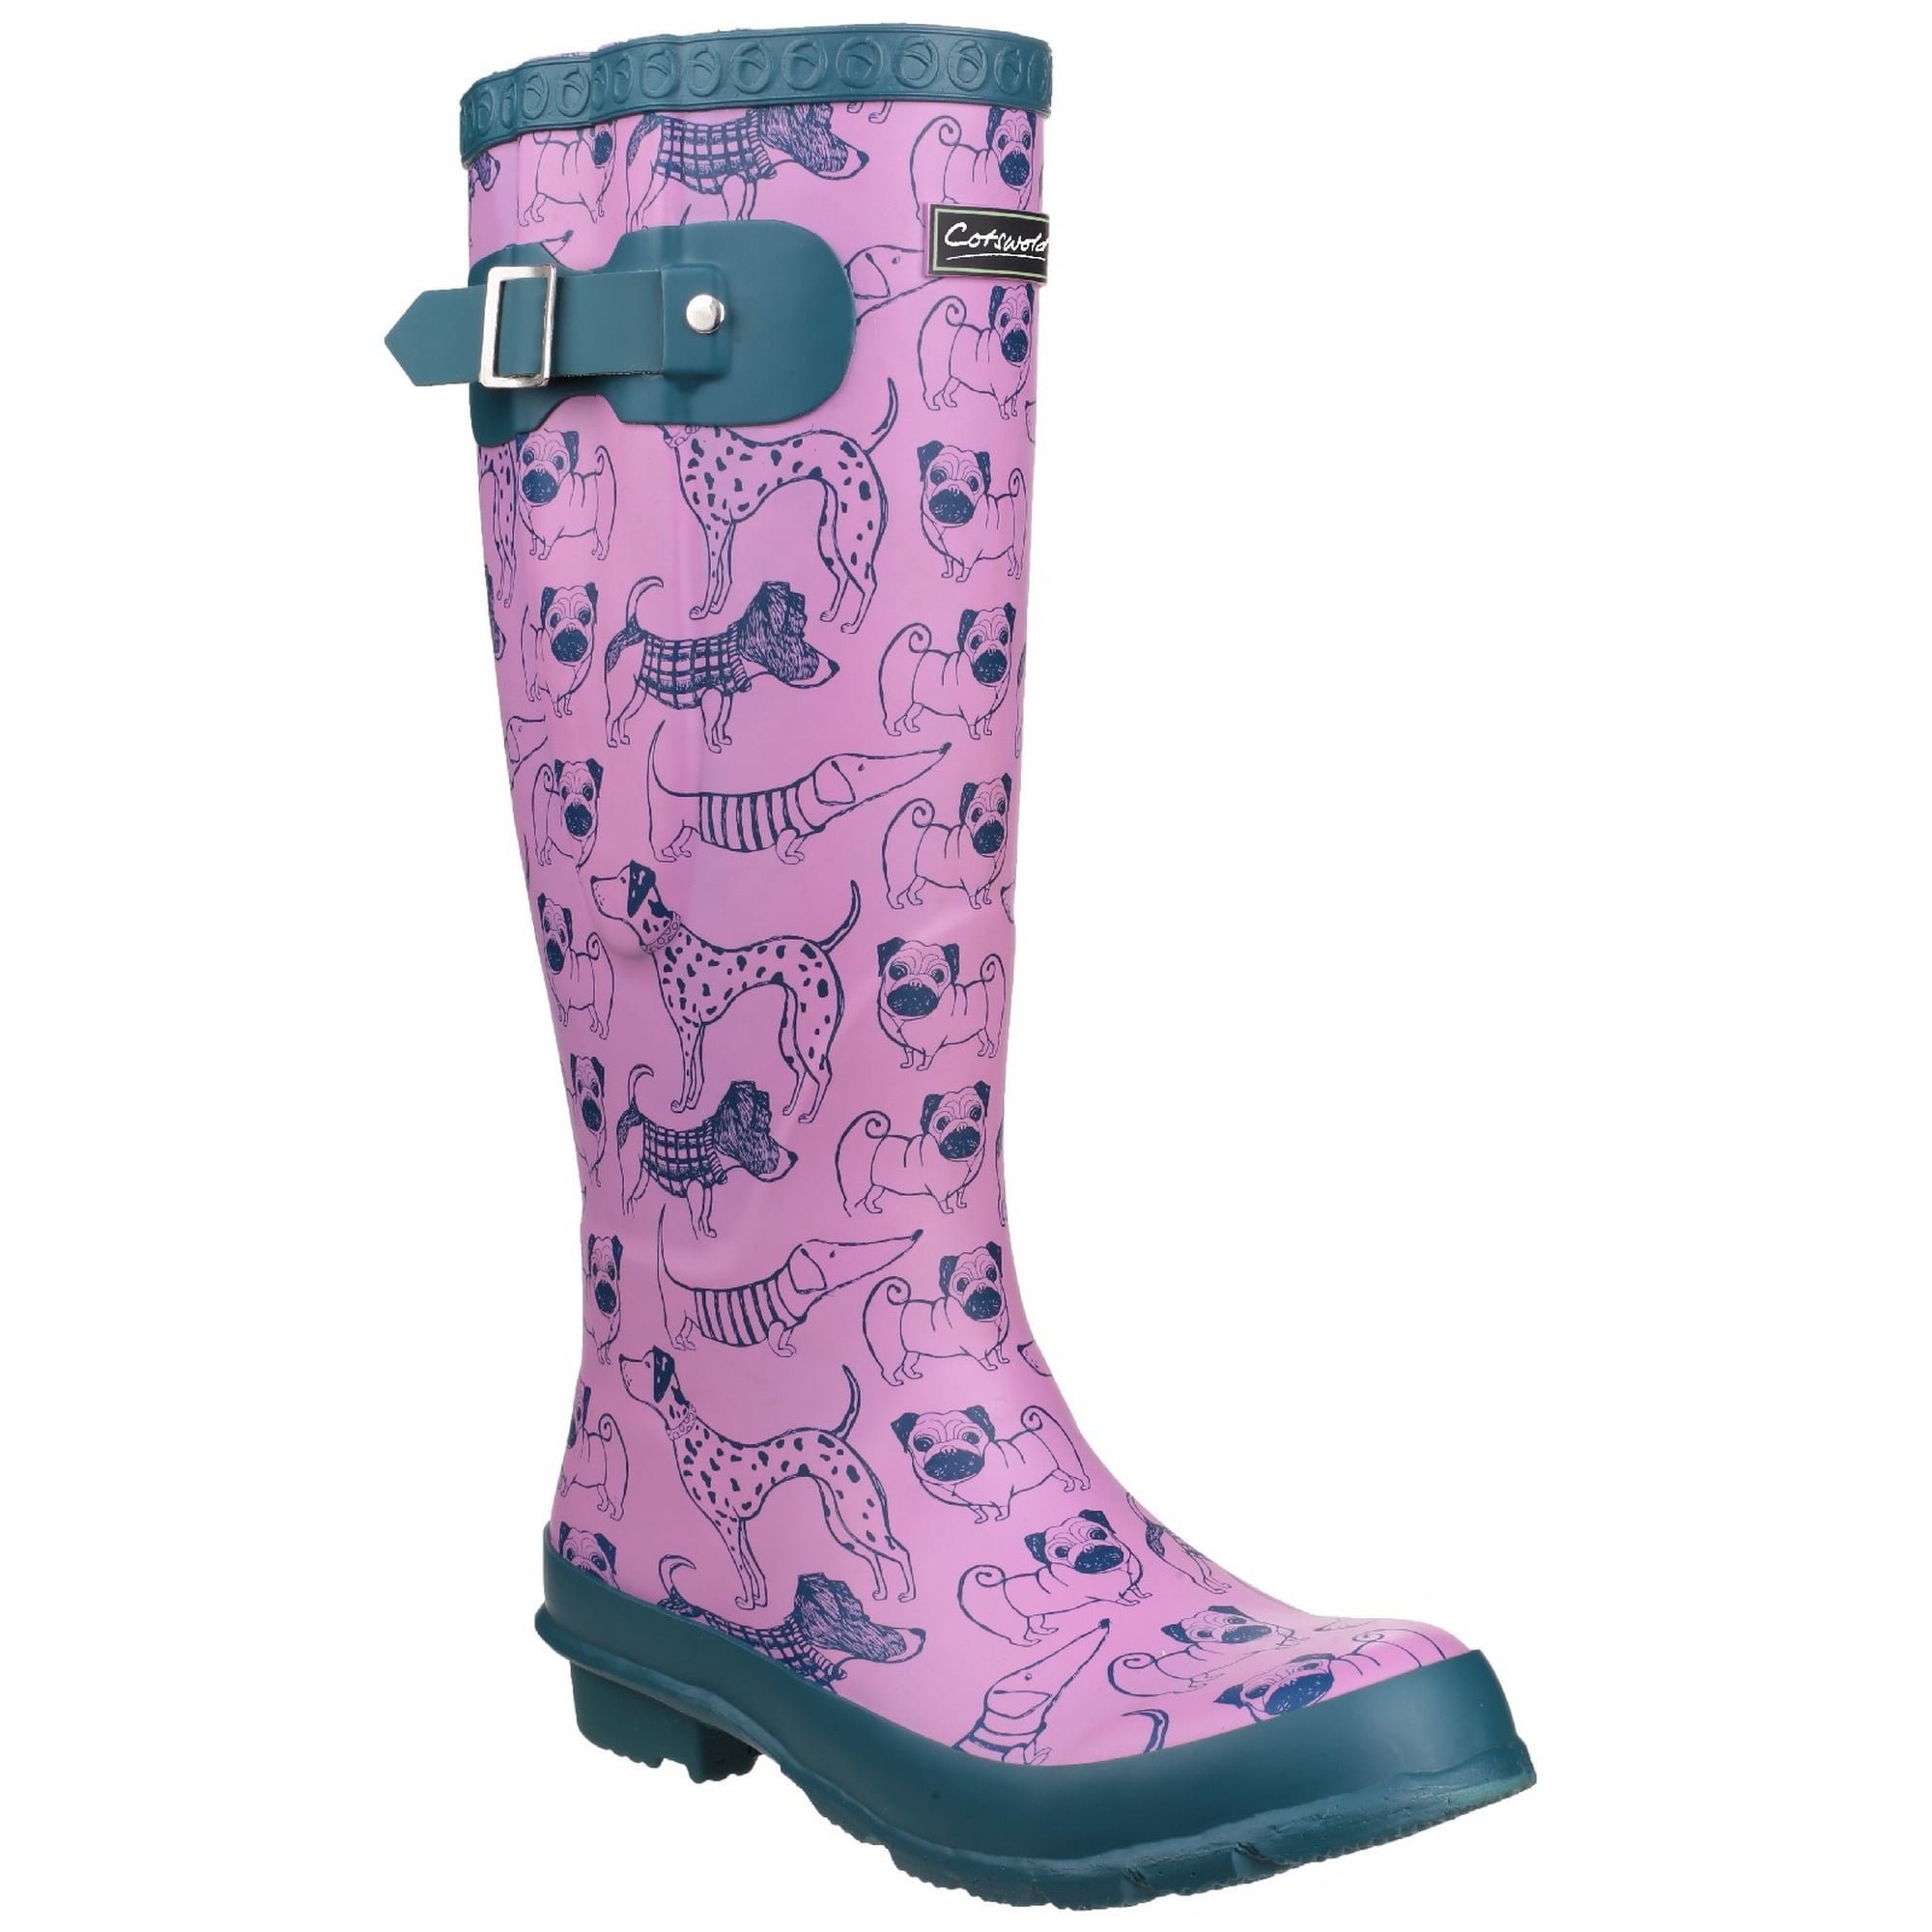 Cotswold DOG PAW WELLY Womens Ladies Rubber Adjustable Wellington Boots Purple 